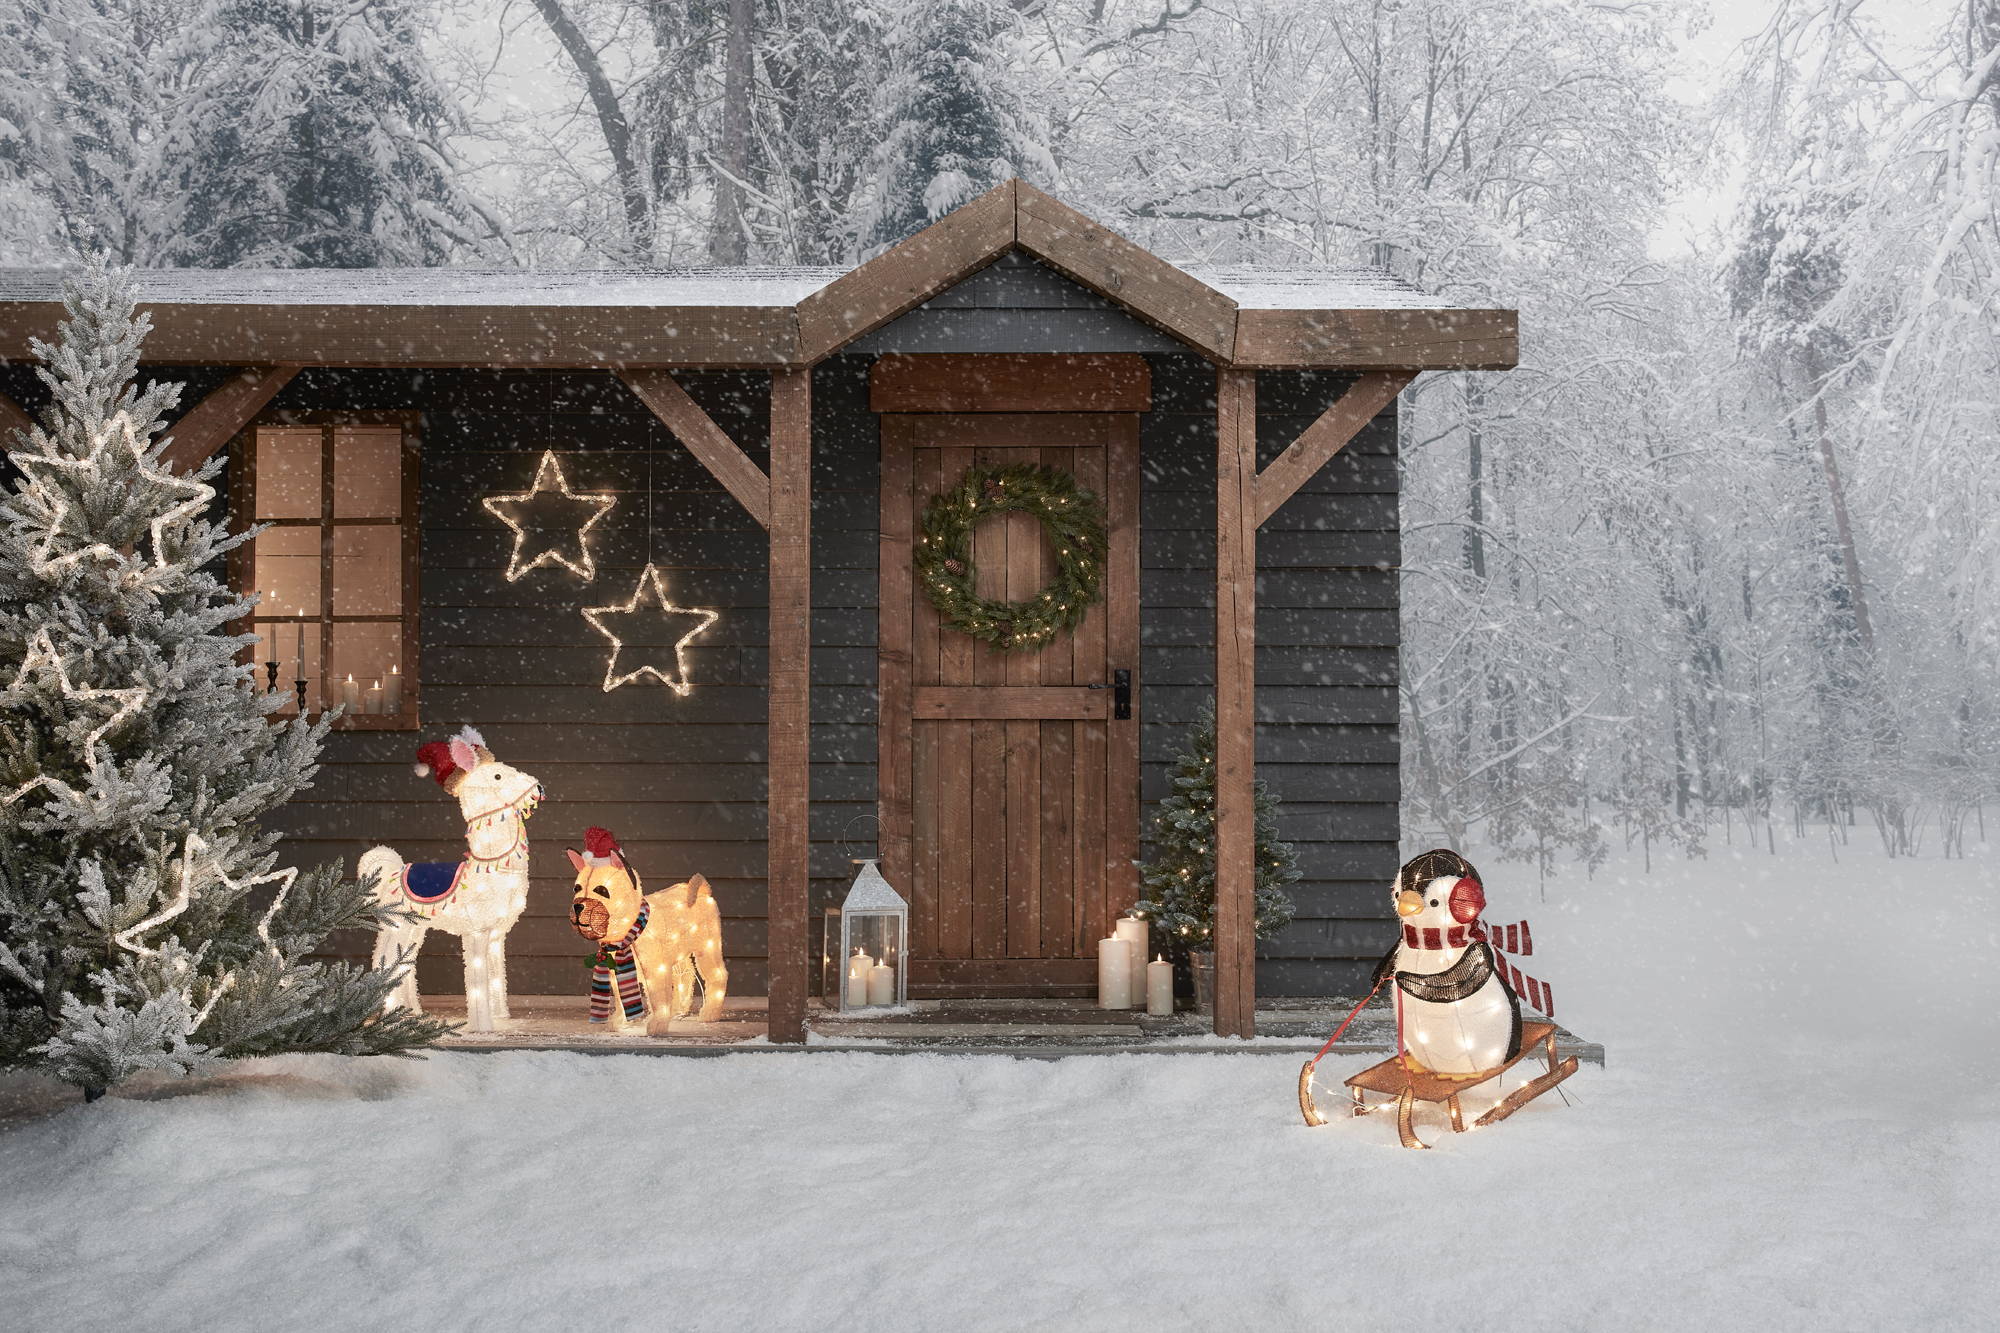 A winter wonderland setting with light up figures around a cottage.